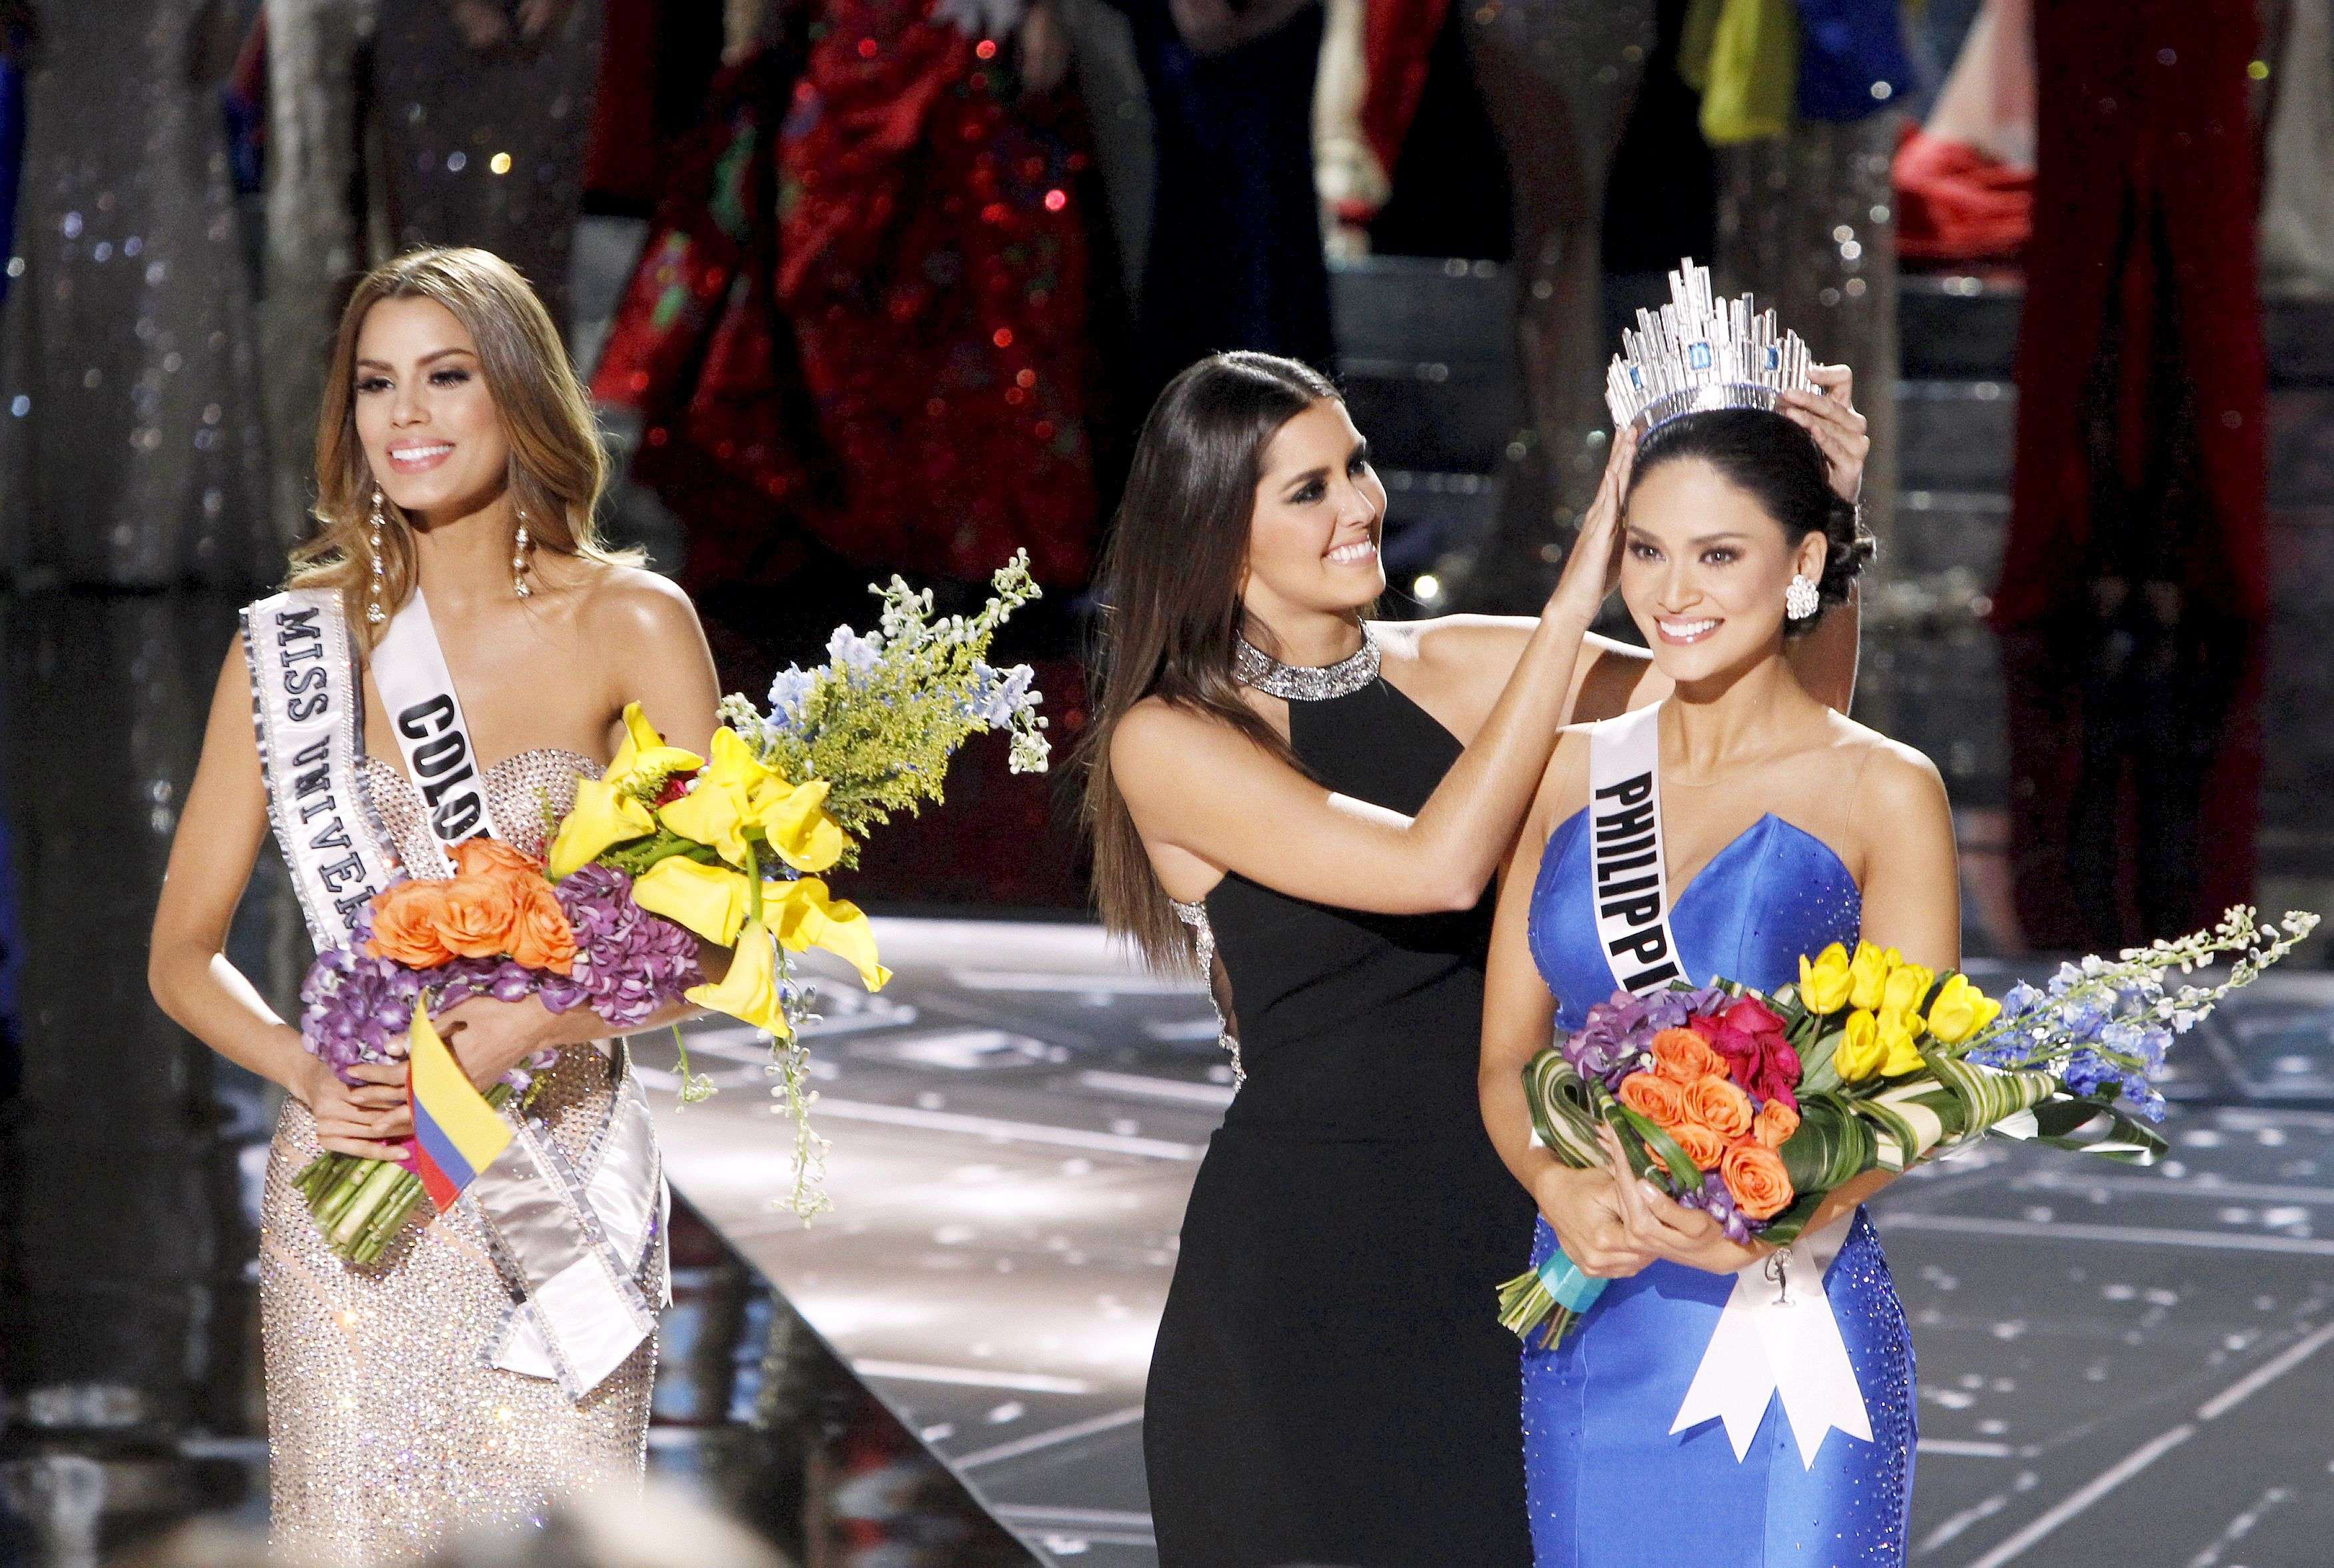 Miss Colombia Ariadna Gutierrez (L) stands by as Miss Universe 2014 Paulina Vega (C) transfers the crown to winner Miss Philippines Pia Alonzo Wurtzbach during the 2015 Miss Universe Pageant in Las Vegas, Nevada, December 20, 2015. Miss Colombia was originally announced as the winner but the host Steve Harvey said he made a mistake when reading the card. REUTERS/Steve Marcus ATTENTION EDITORS - FOR EDITORIAL USE ONLY. NOT FOR SALE FOR MARKETING OR ADVERTISING CAMPAIGNS